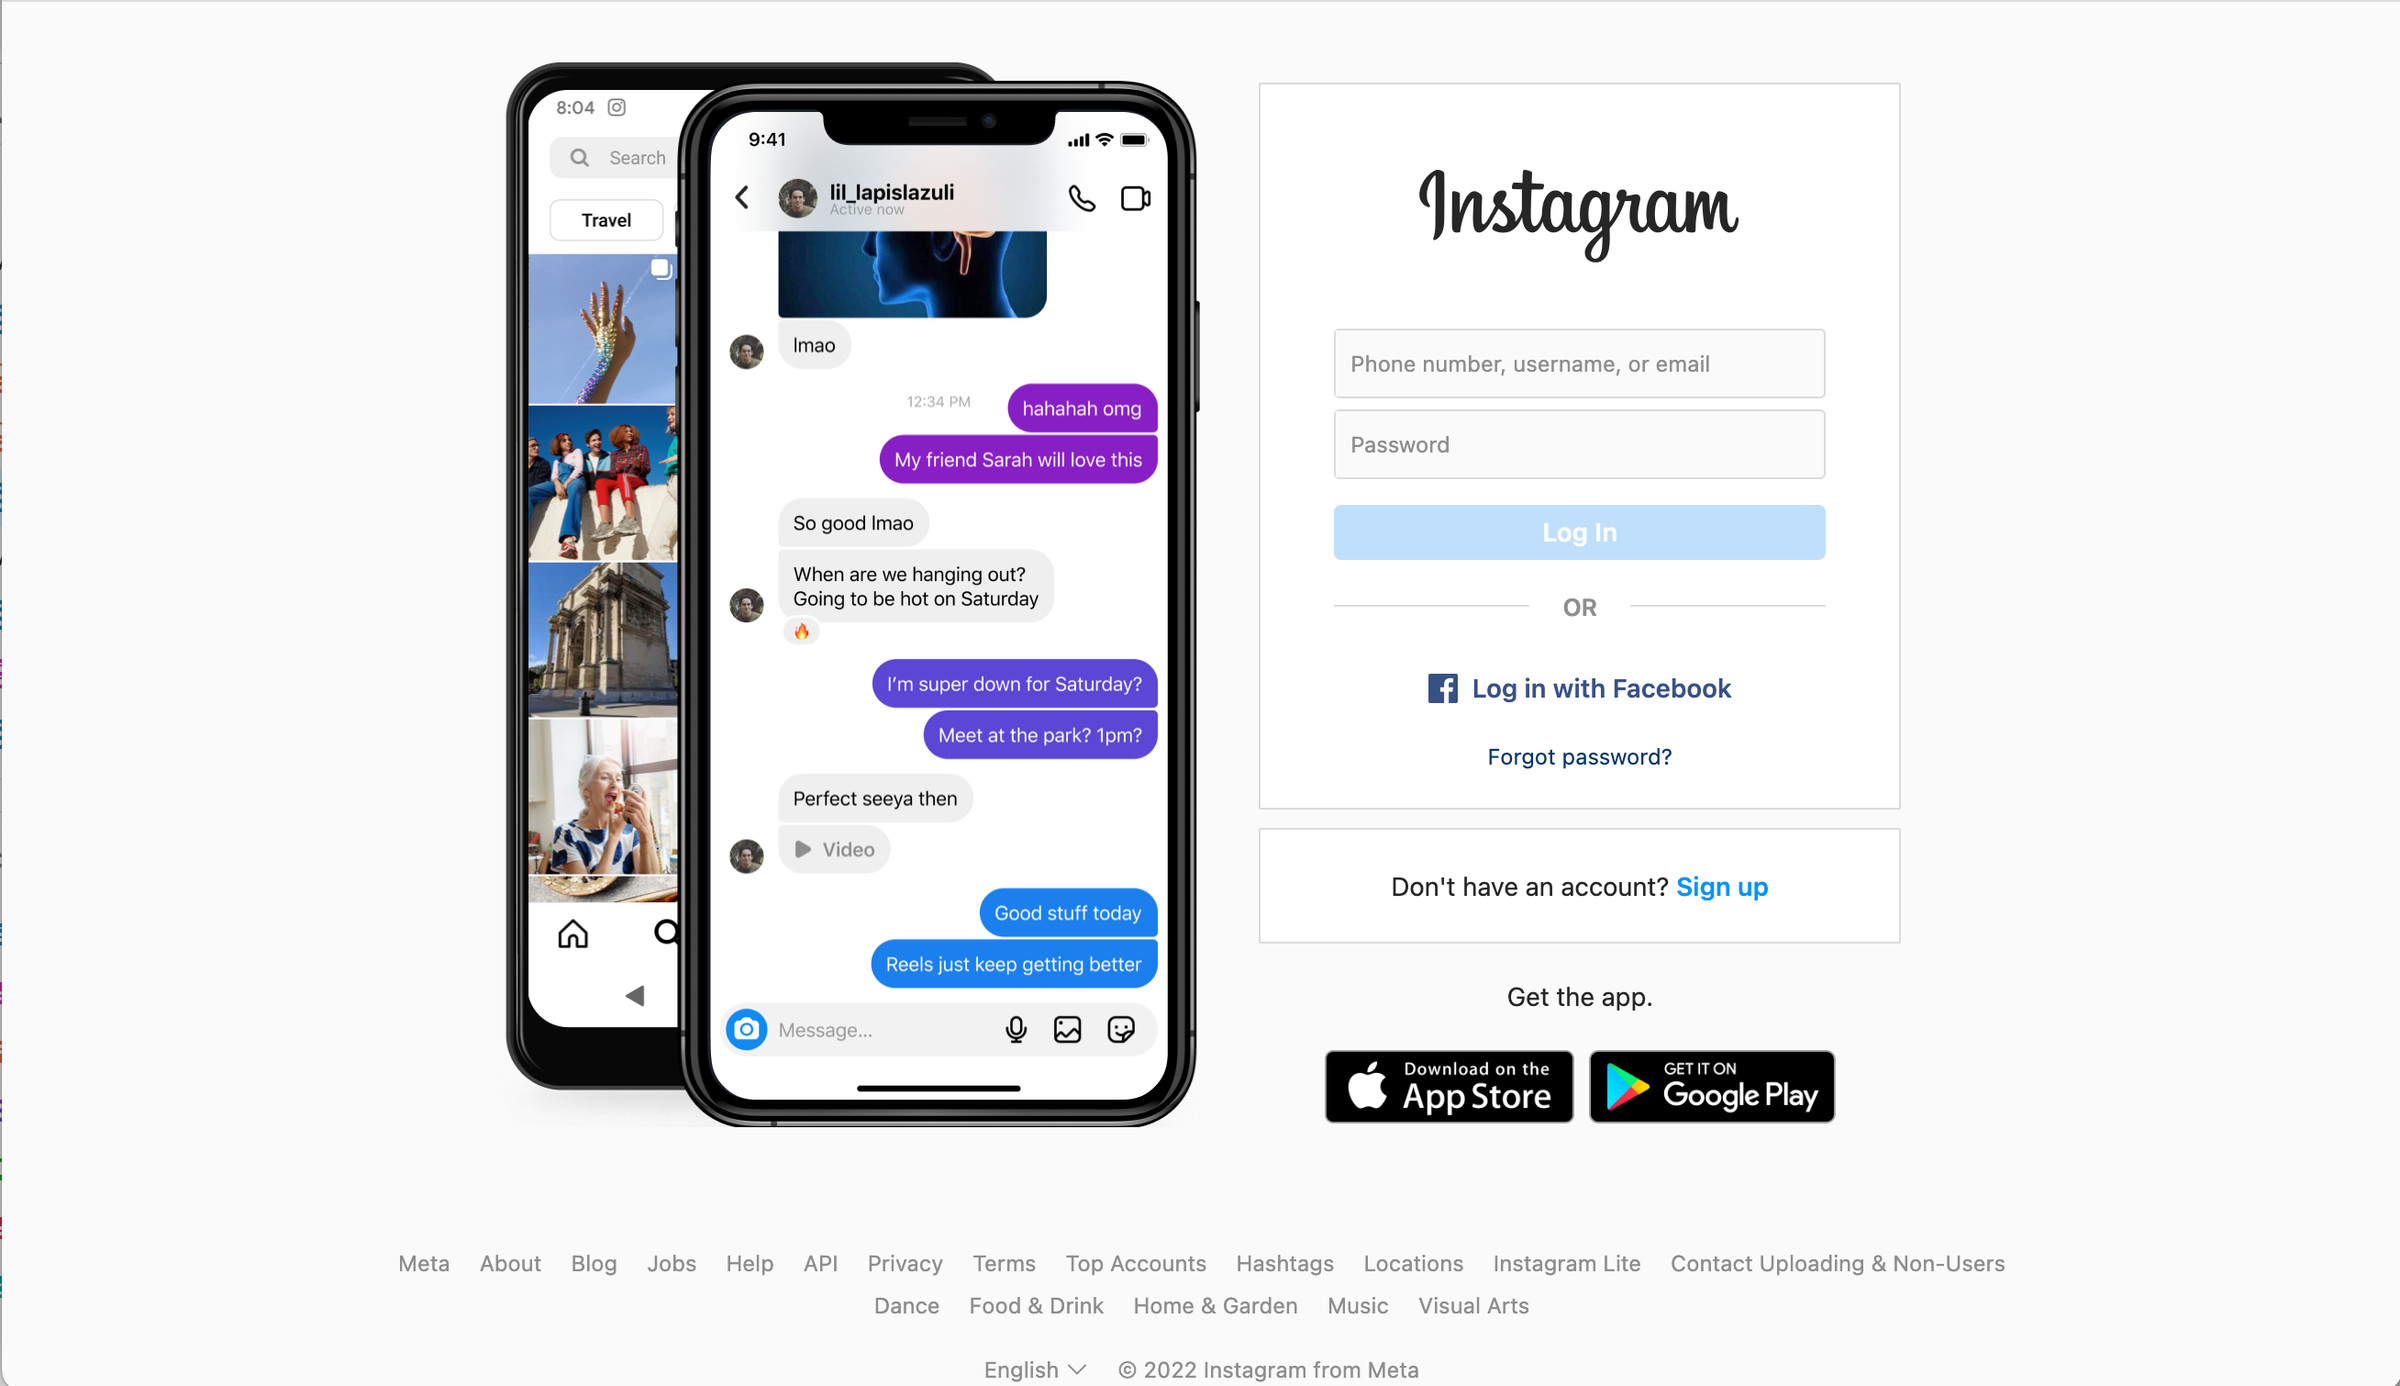 Instagram log-in page